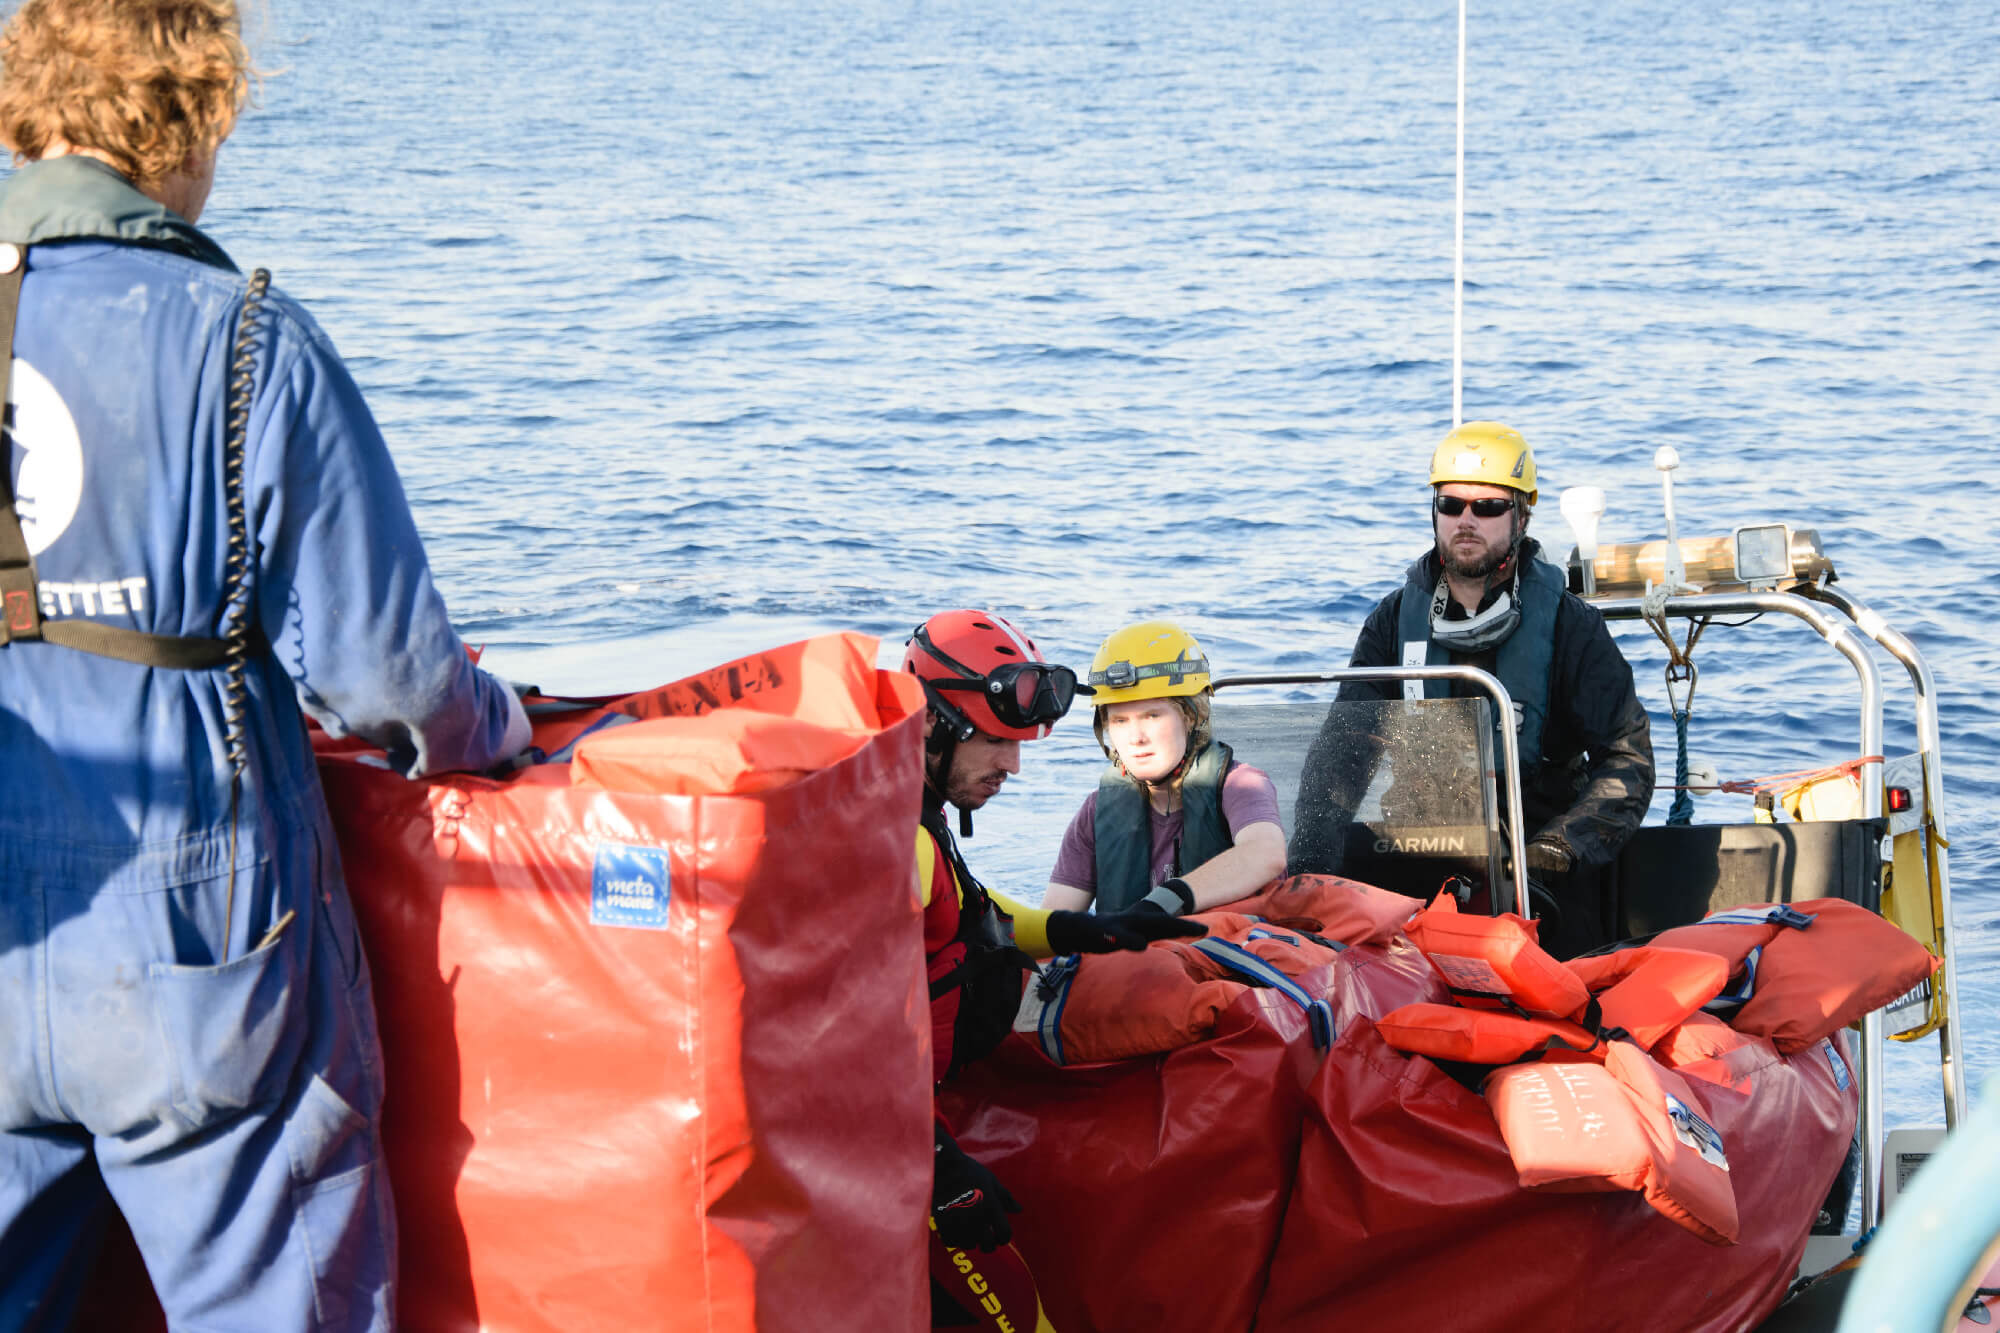 The Ocean in the Background, in the Foreground a person with red buybacks filled with rescue-jackets which are handed over to crew-members on a RIB.